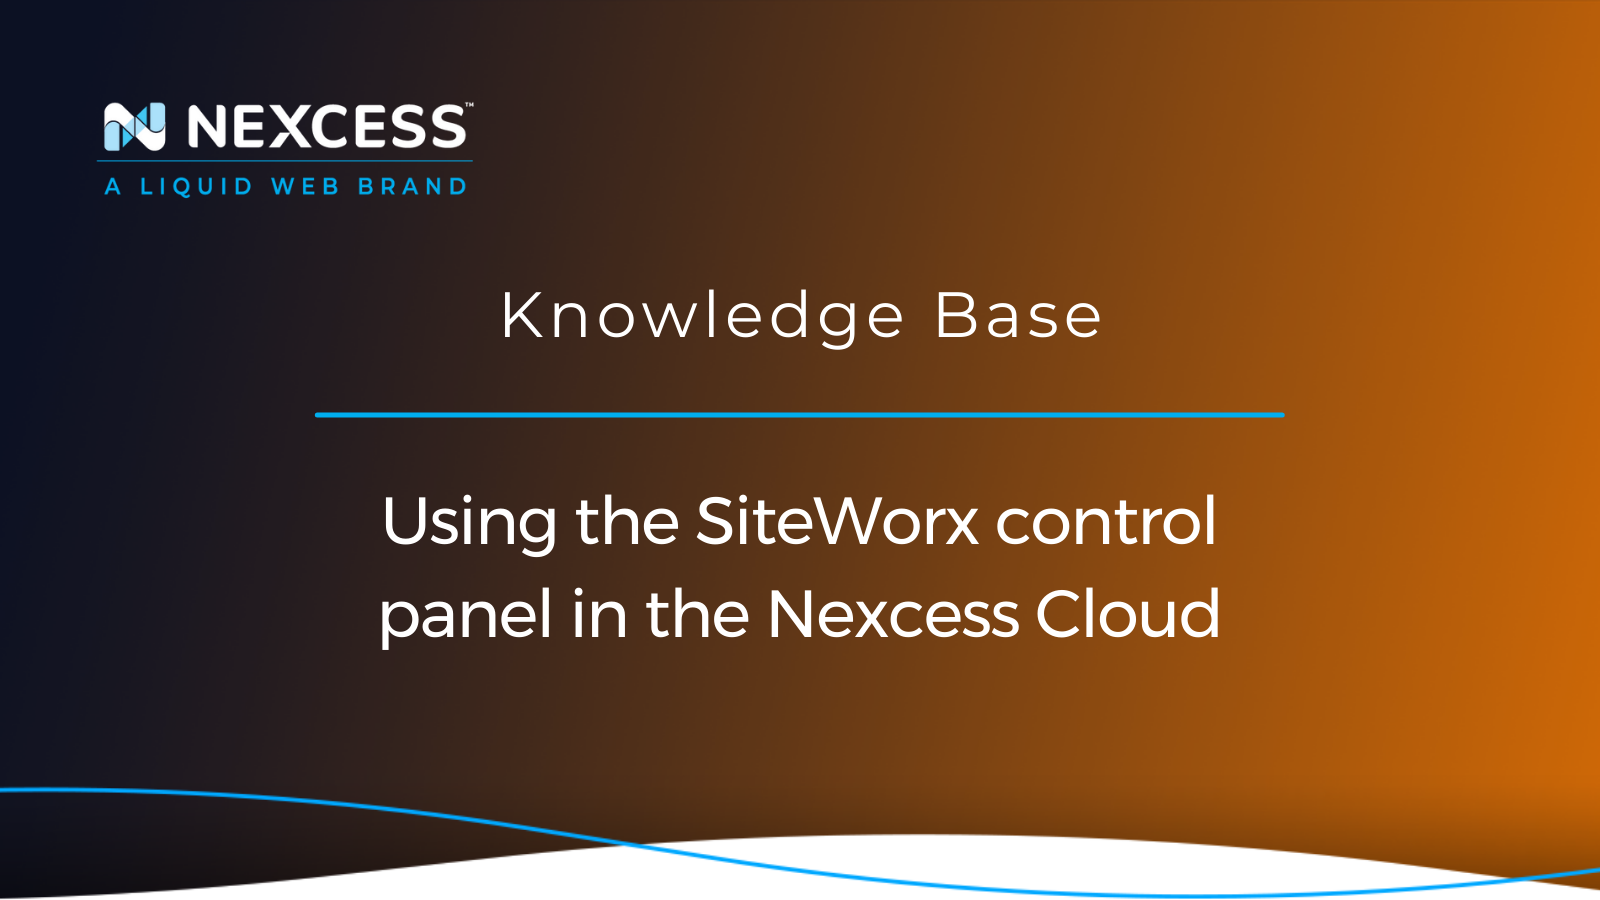 Using the SiteWorx control panel in the Nexcess Cloud